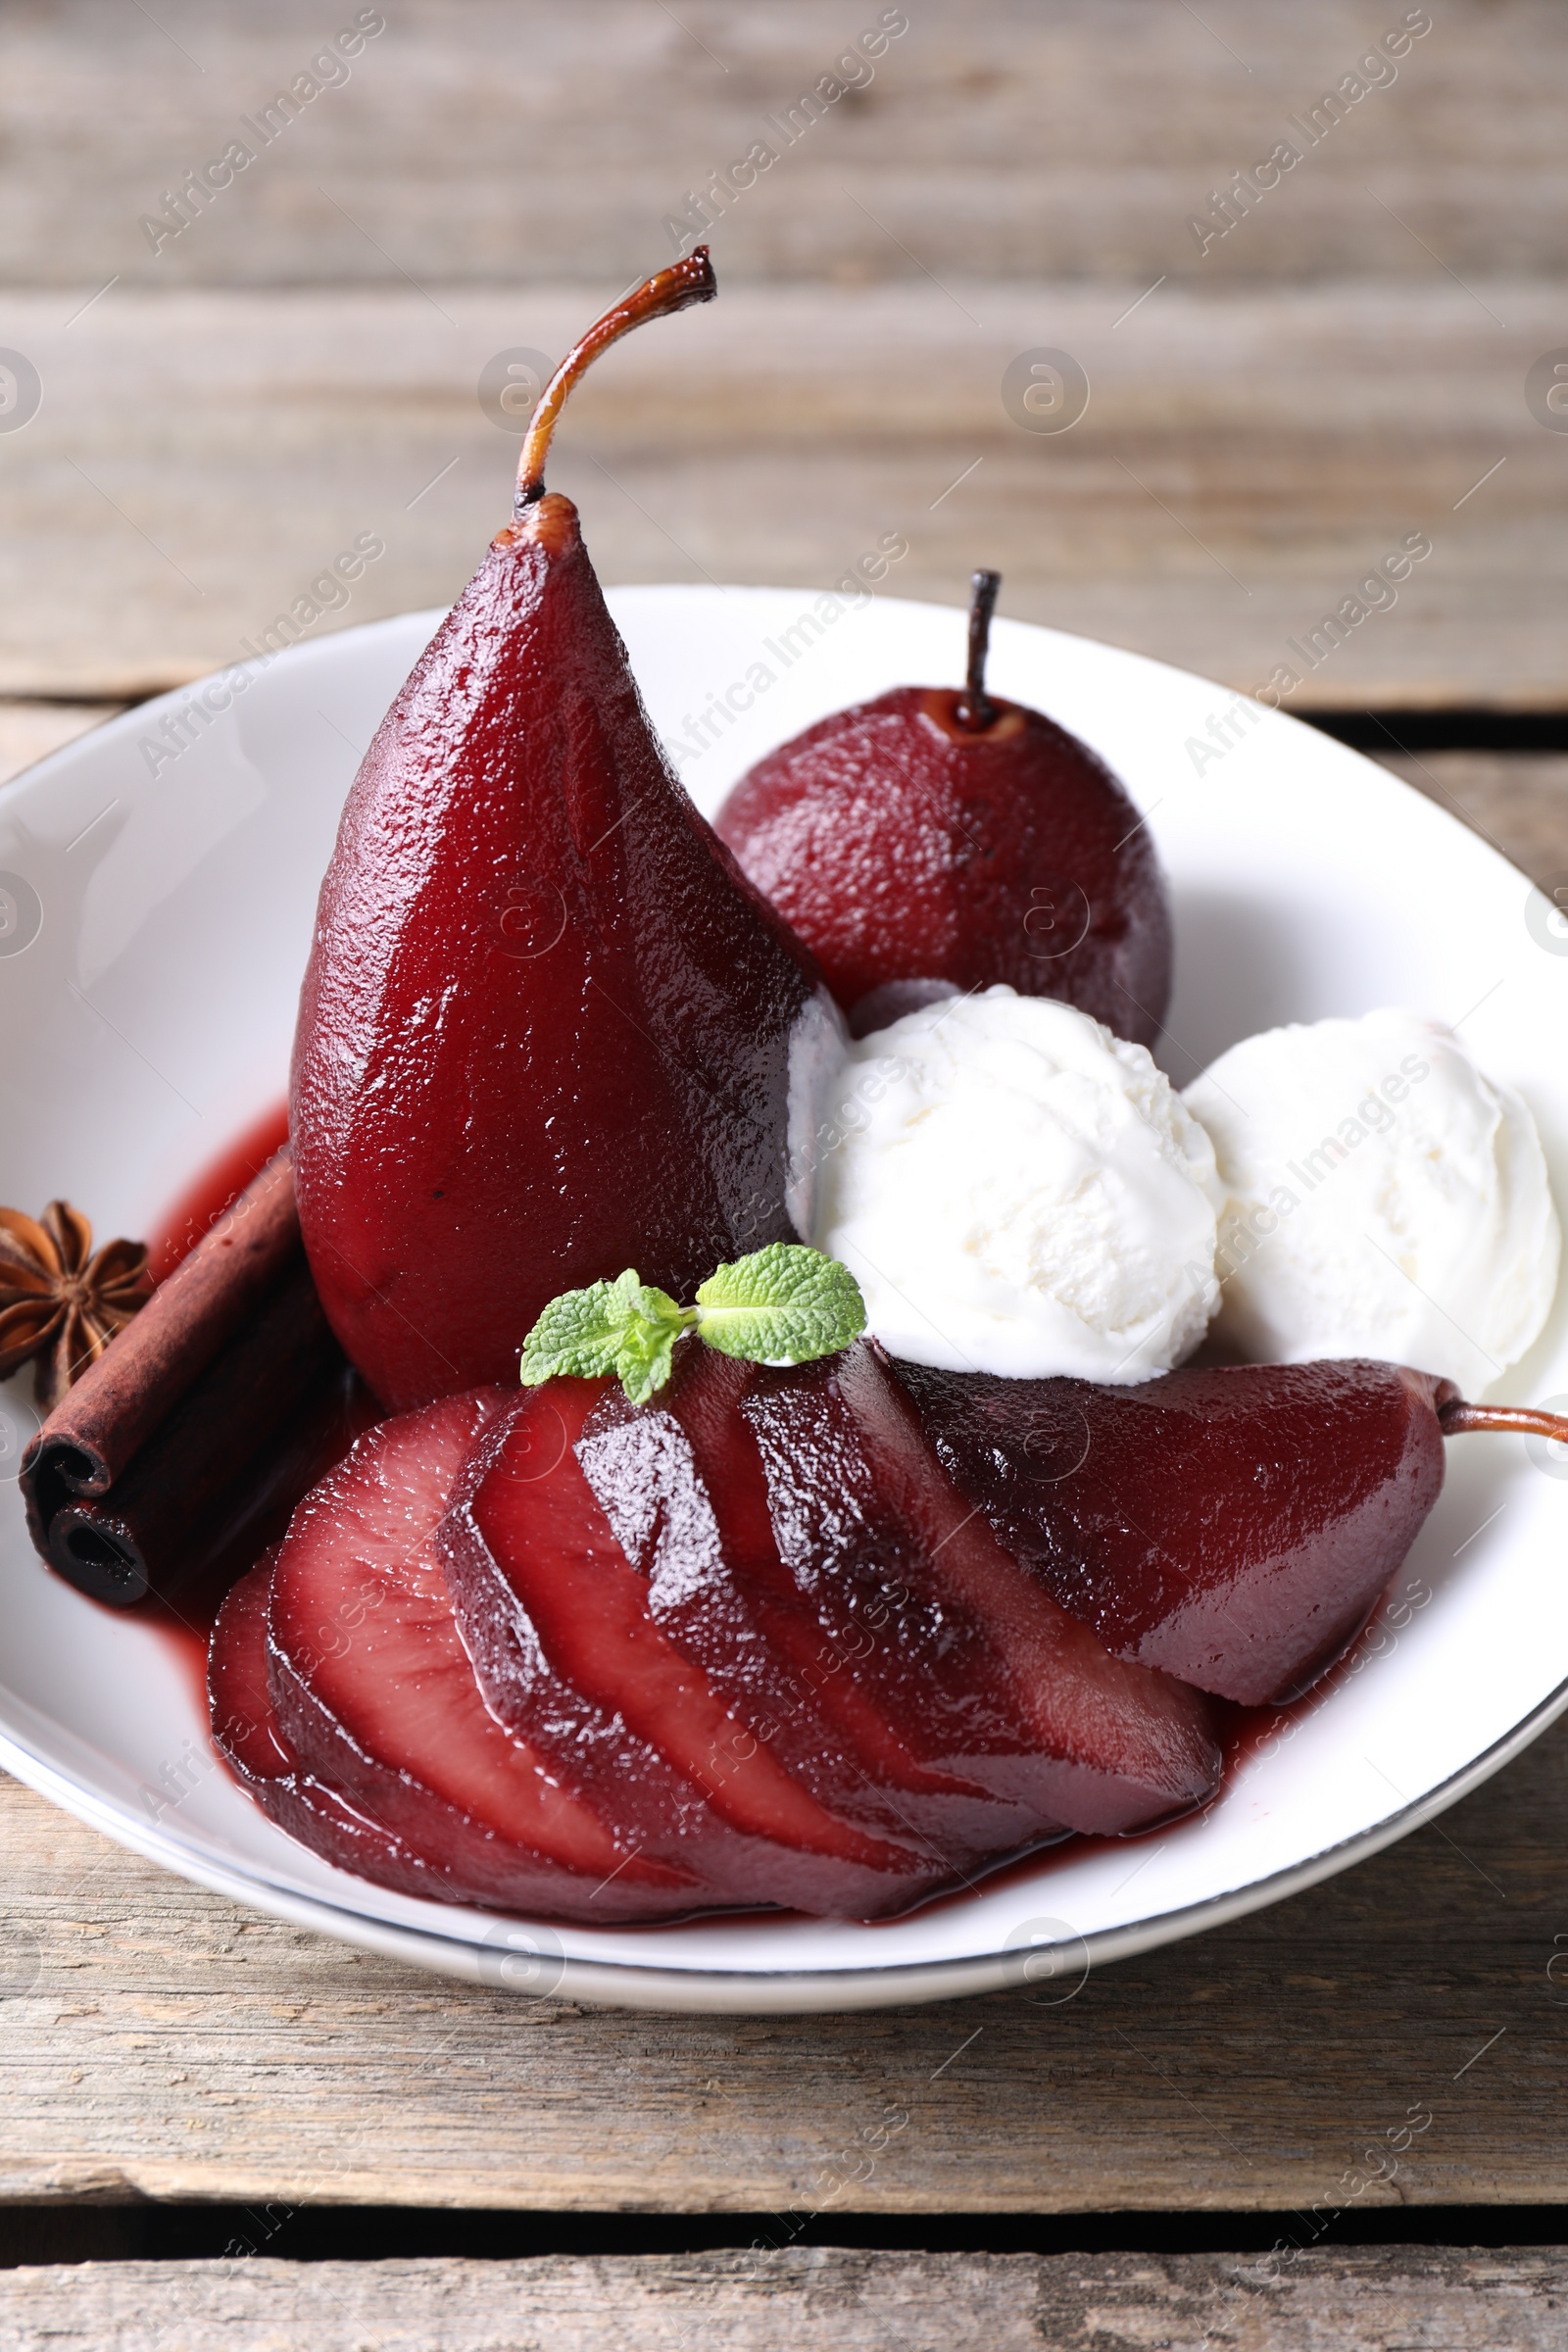 Photo of Tasty red wine poached pears and ice cream in bowl on wooden table, closeup